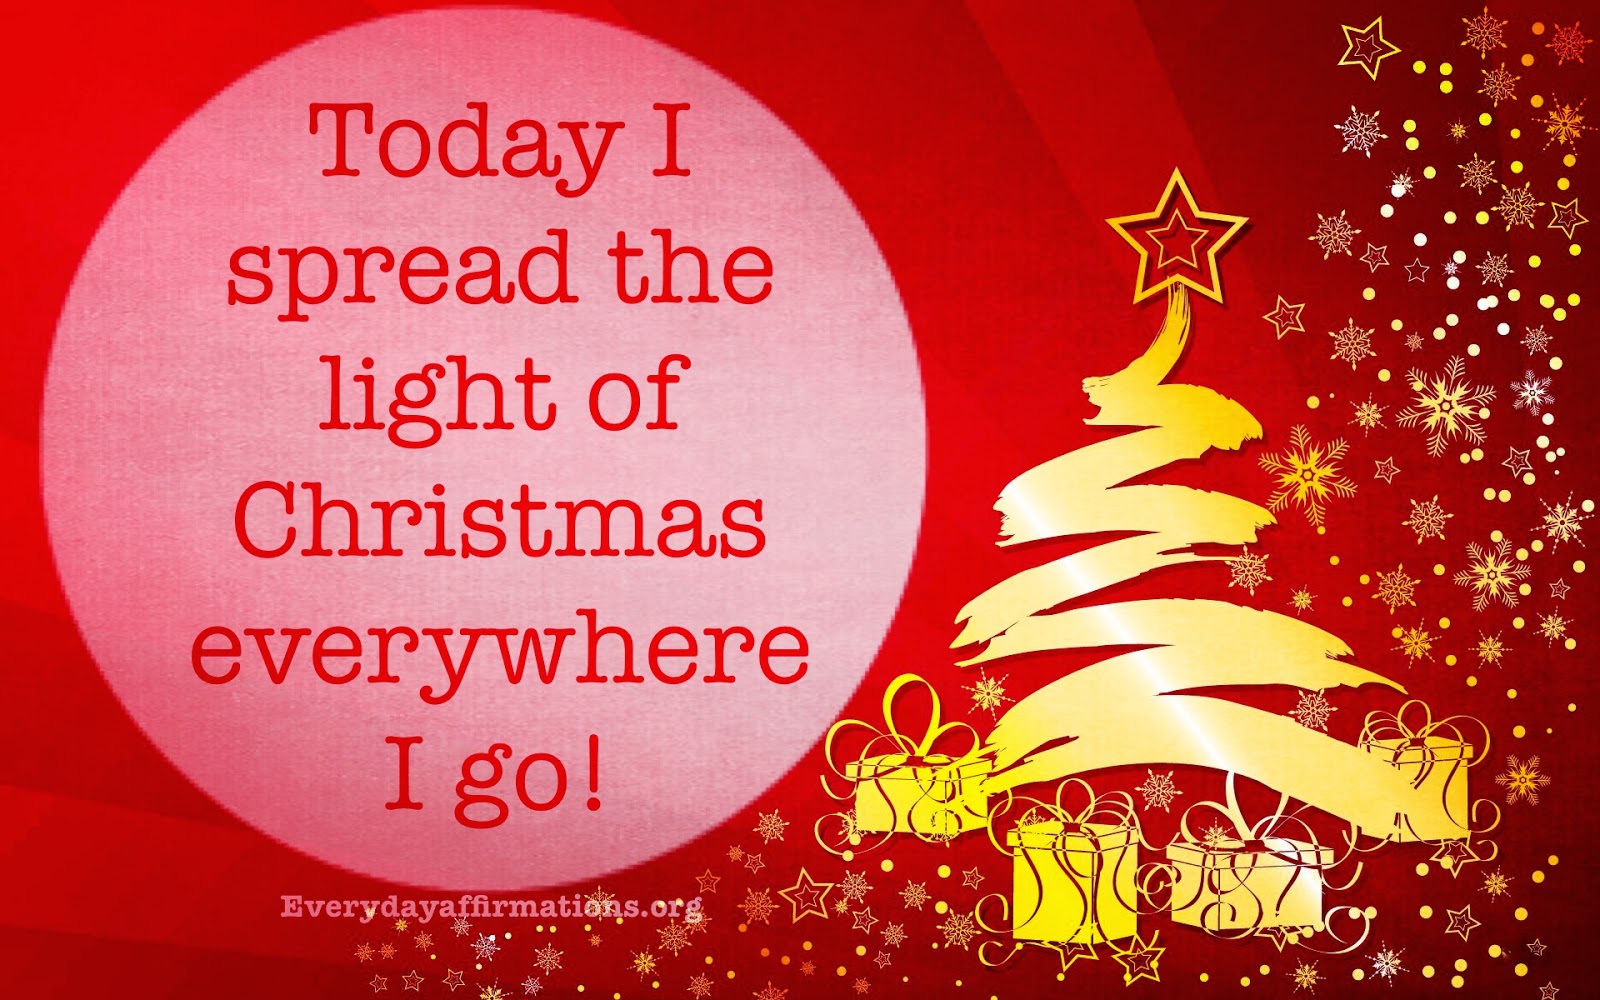 Daily Affirmations, Christmas Affirmations, affirmations for new year